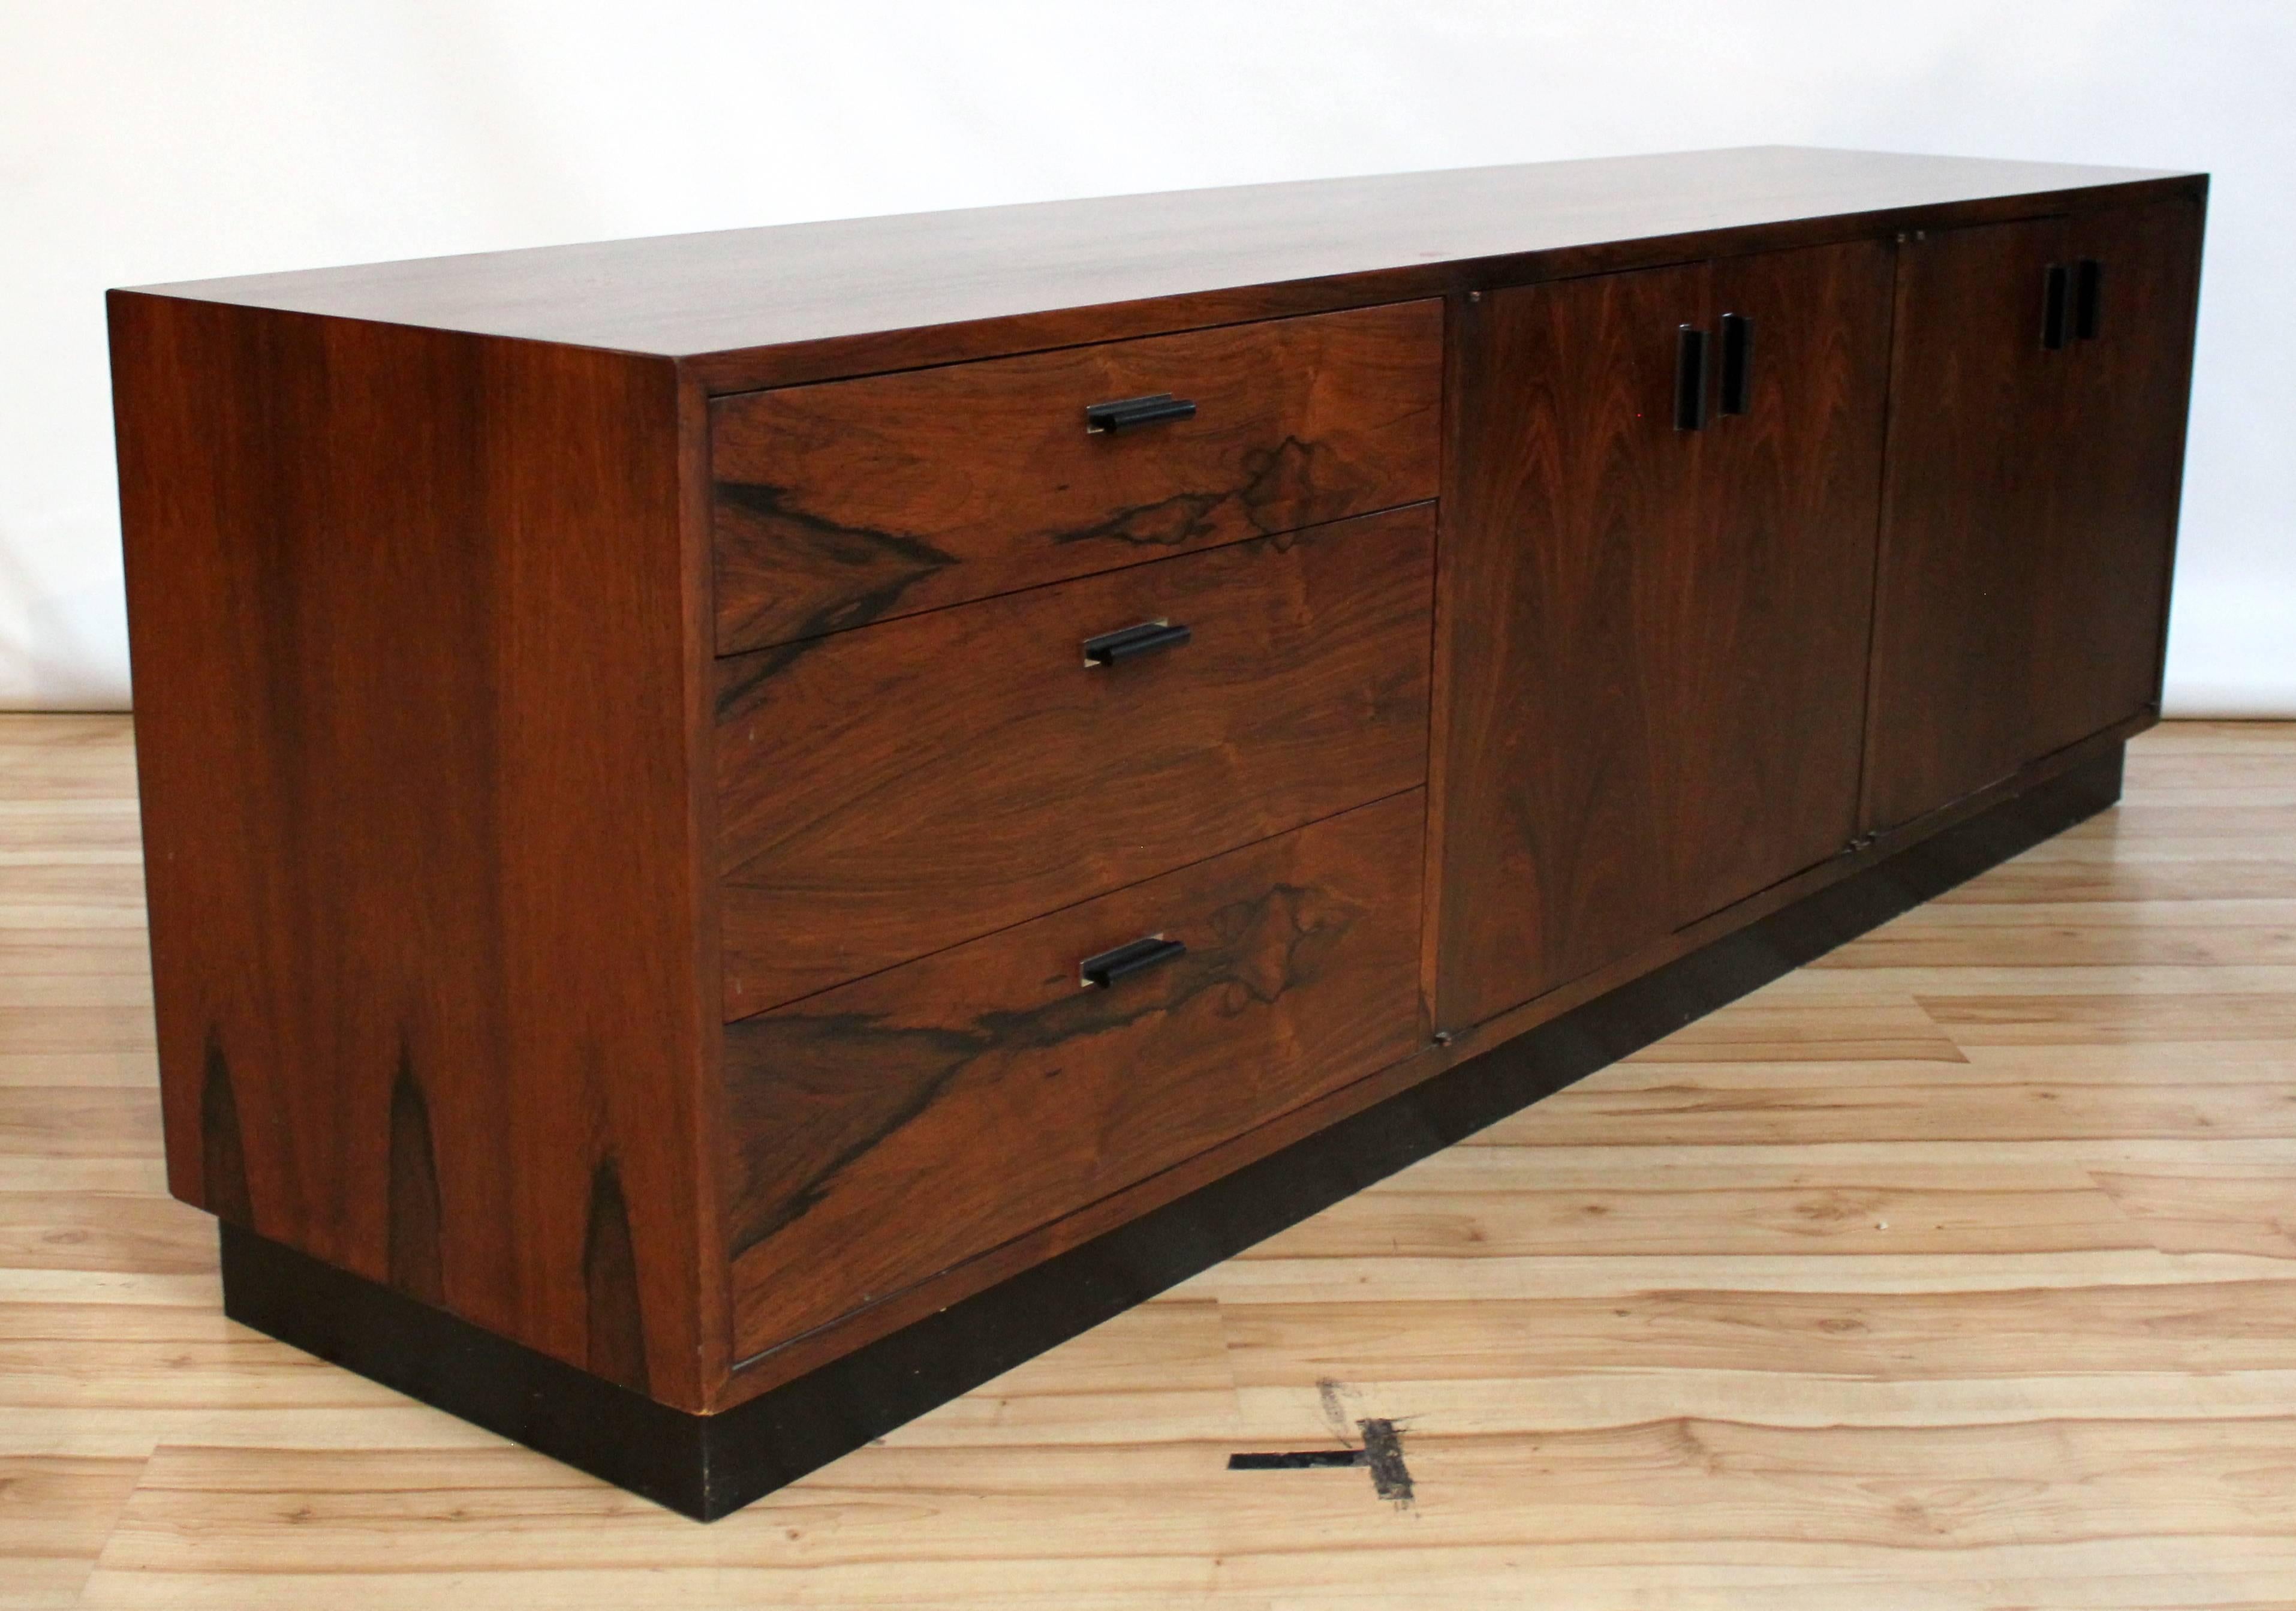 1950s Brazilian rosewood credenza by Harvey Probber on inset black plinth base. The credenza features three drawers and two cabinets with adjustable shelves. 